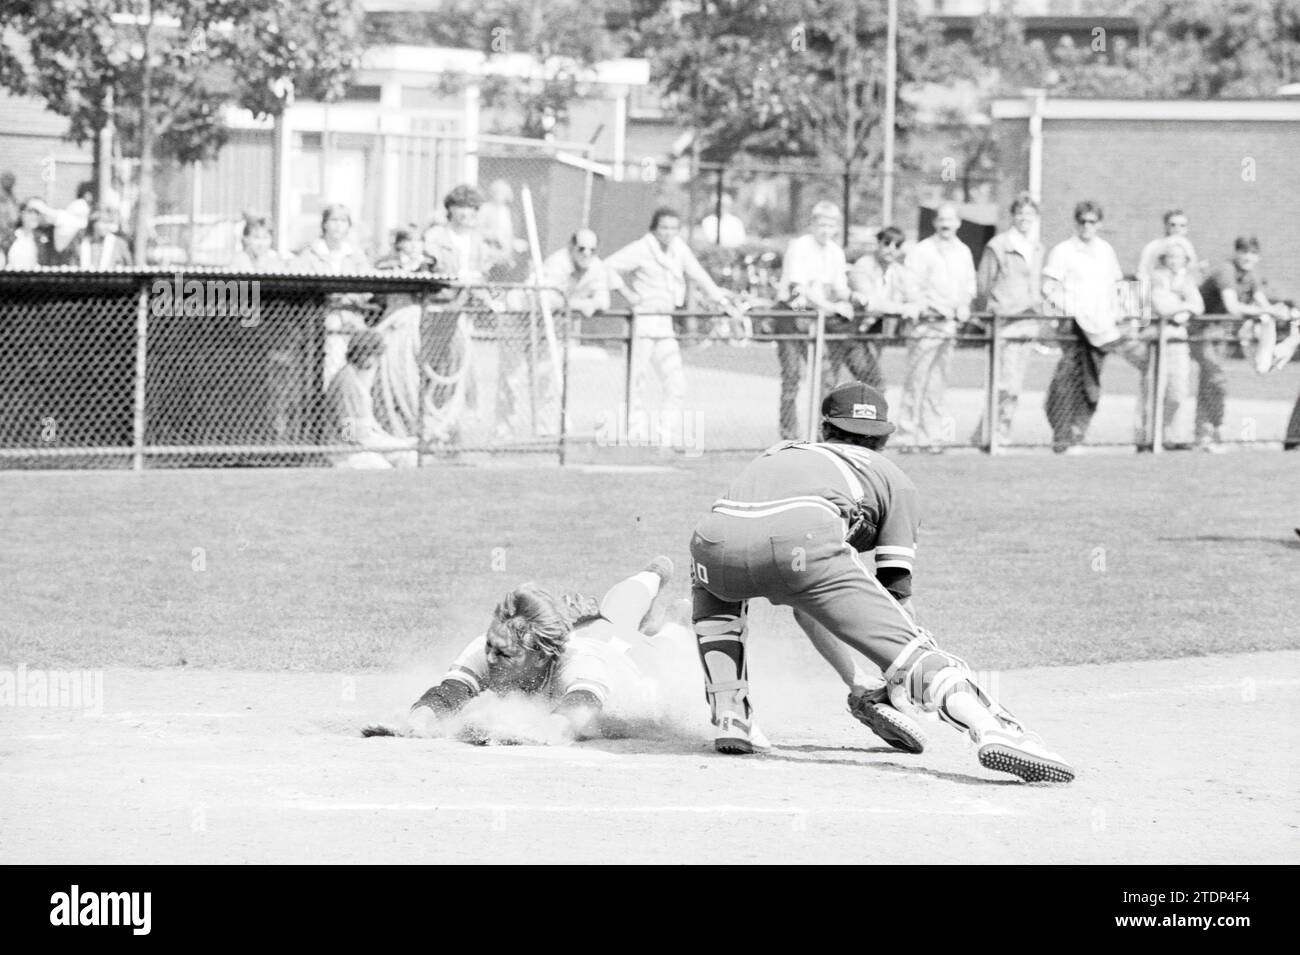 Kinheim - RCH, Baseball Kinheim, 05-08-1984, Whizgle News from the Past, Tailored for the Future. Explore historical narratives, Dutch The Netherlands agency image with a modern perspective, bridging the gap between yesterday's events and tomorrow's insights. A timeless journey shaping the stories that shape our future Stock Photo